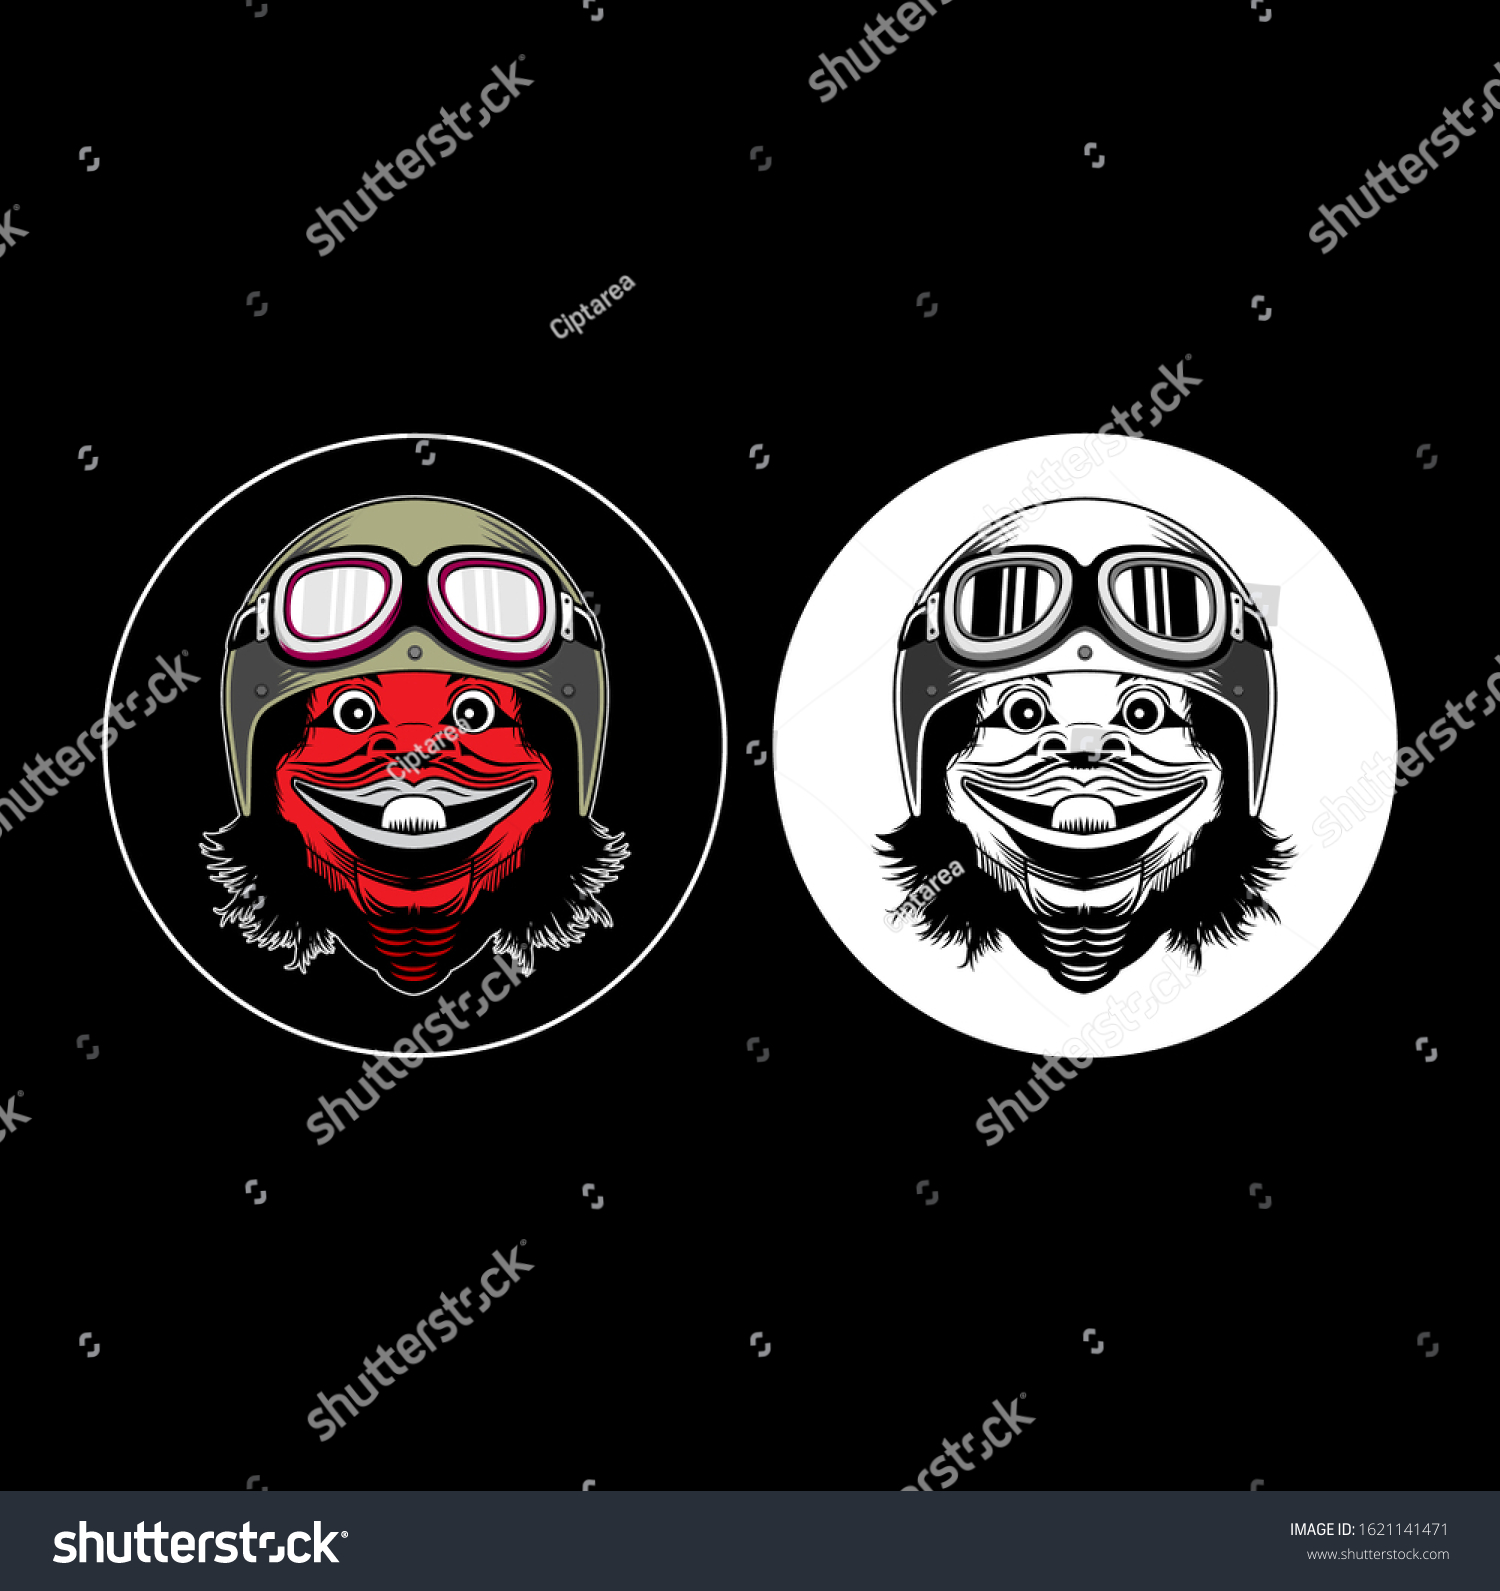 SVG of Cepot in vector style using helmet for ride motor bike club svg